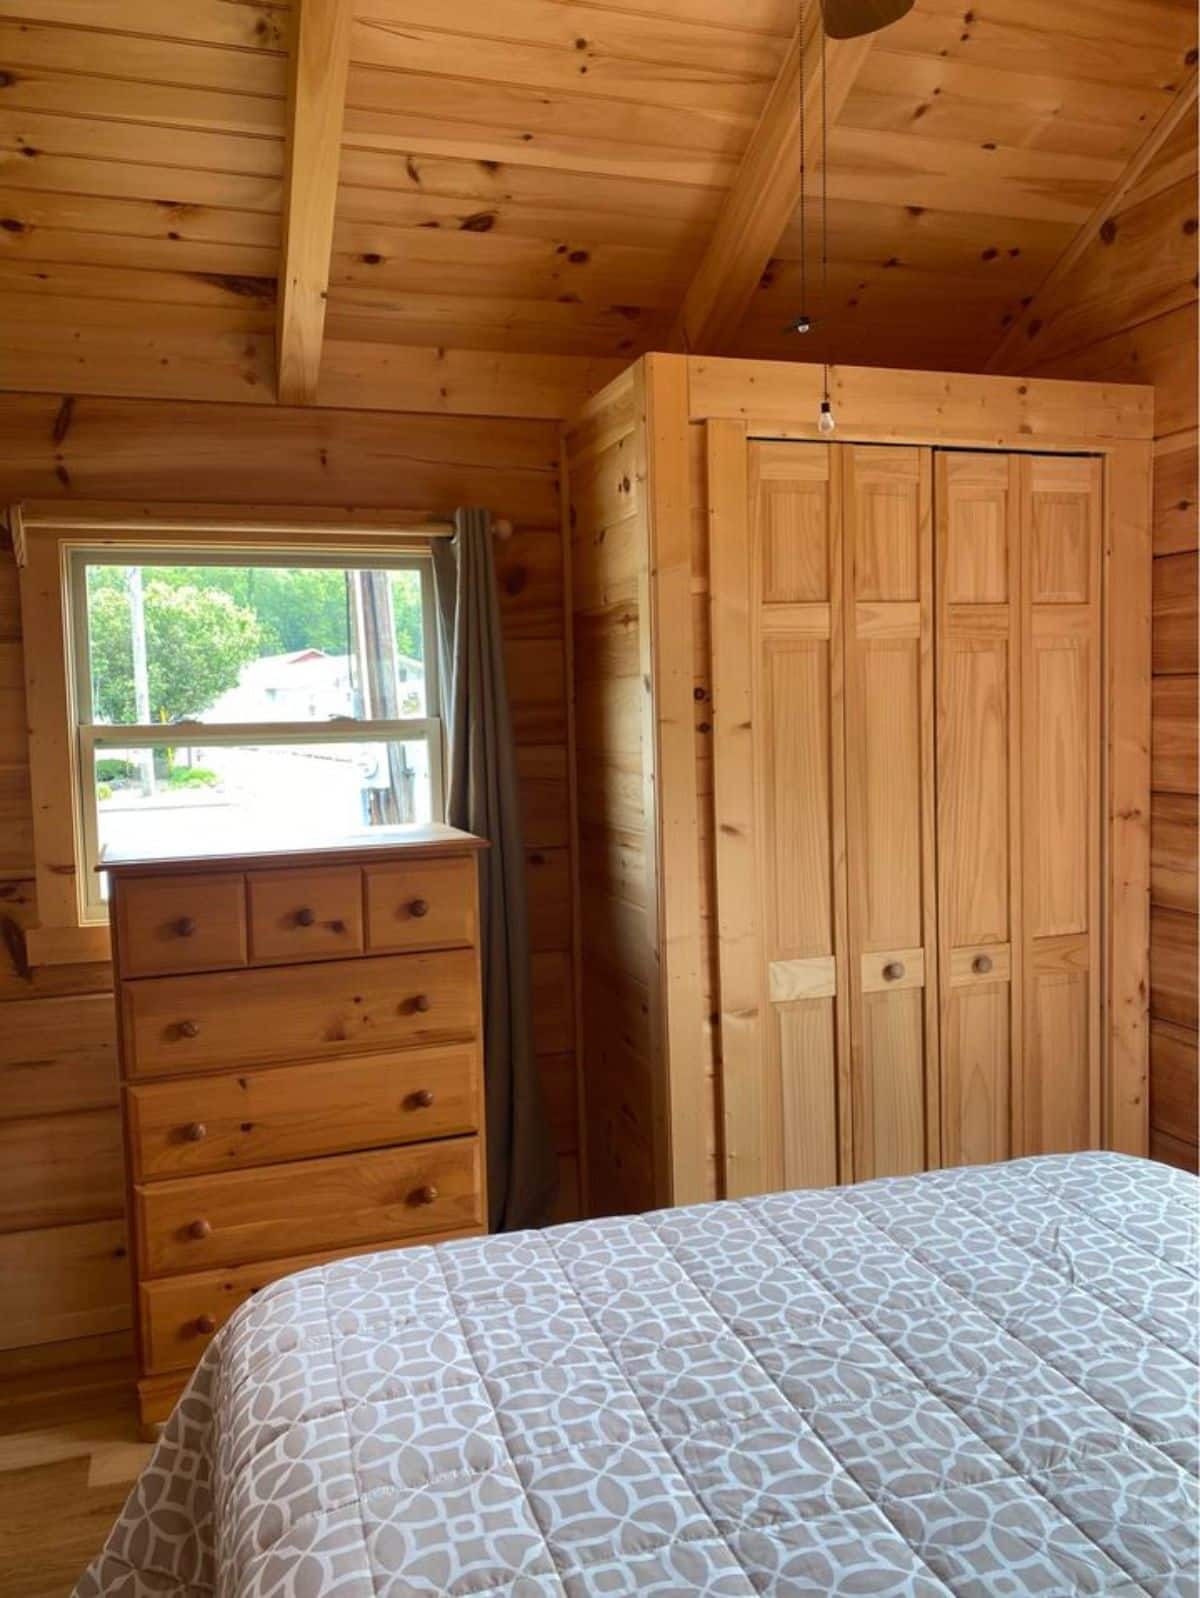 wardrobe and storage cabinets in the bedroom of custom built tiny home